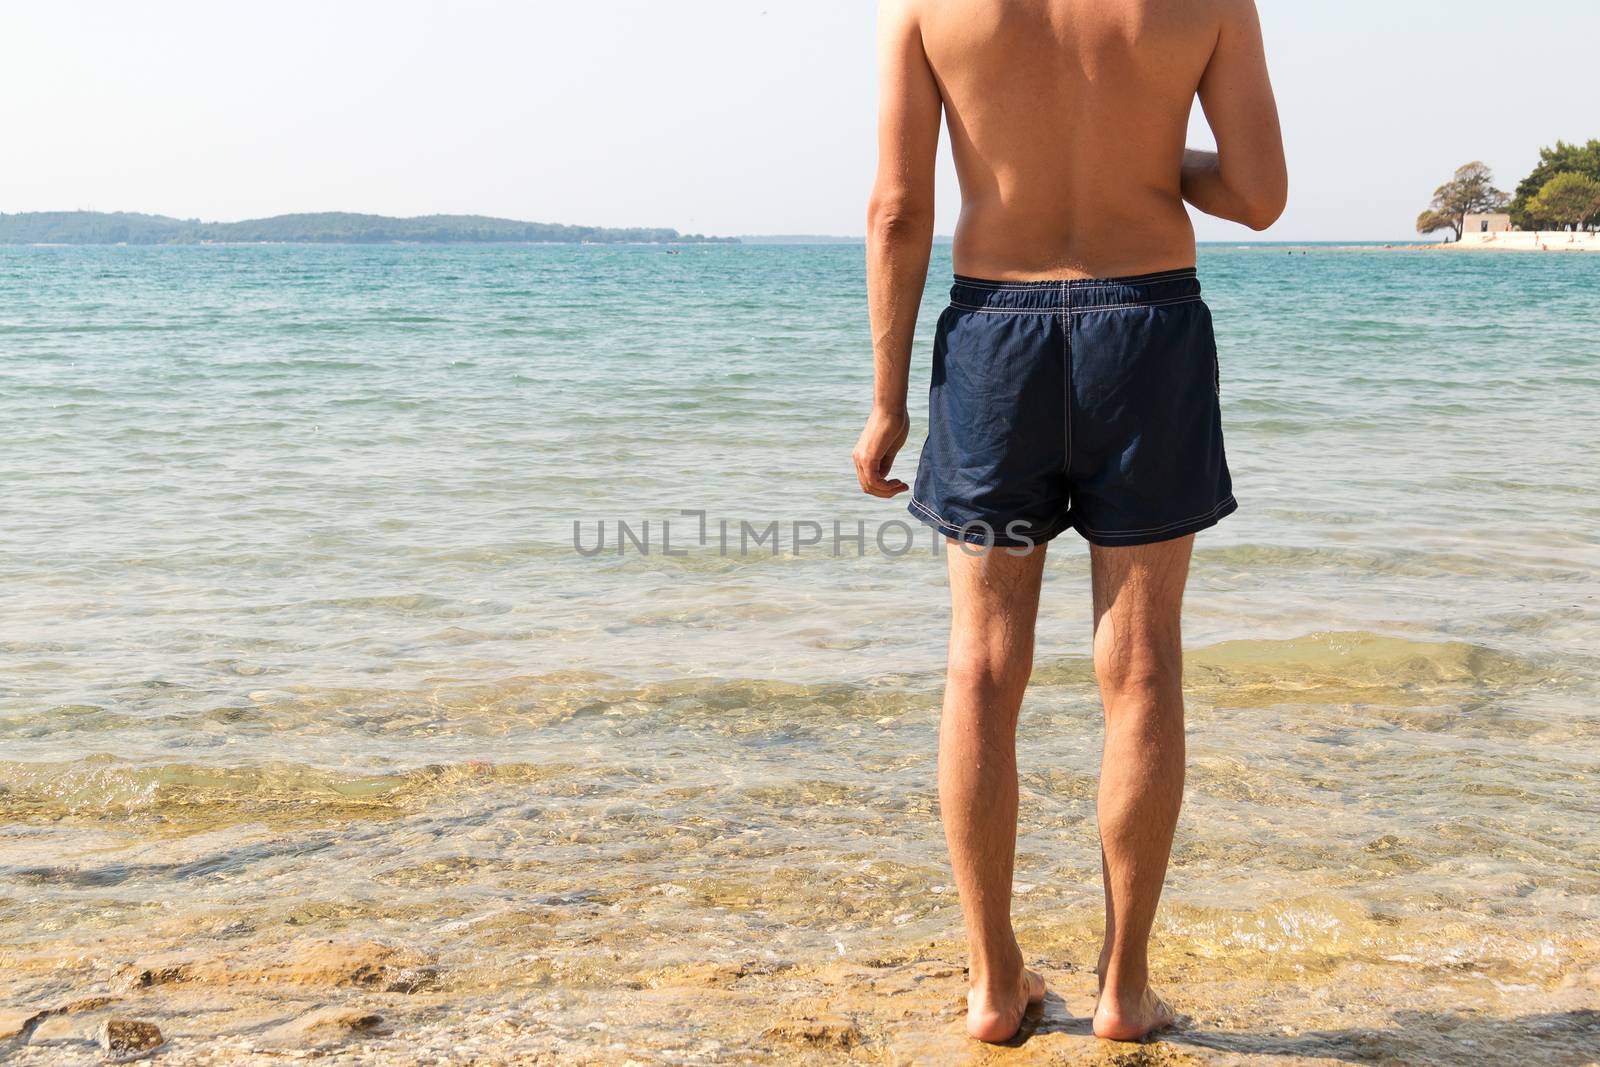 Masculine model of backs looking at the sea. Clear water, bright sun and sunscreen for sunburn. Man in blue shorts getting ready to go swimming in the mediterranean sea